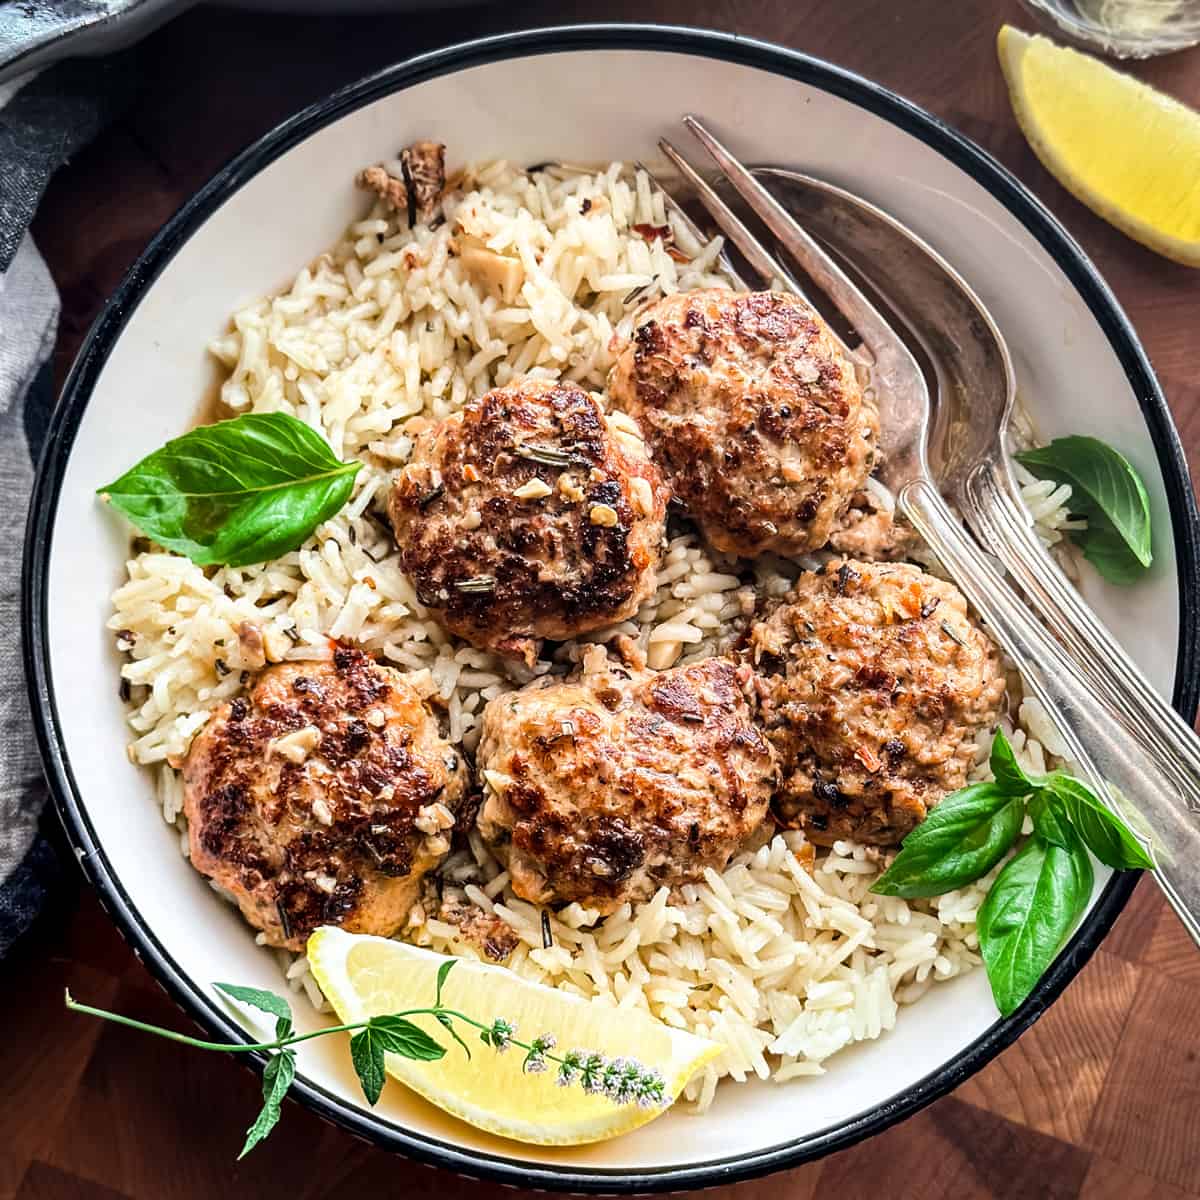 Chicken meatballs on lemon rice in a plate with a lemon wedge and utensils.